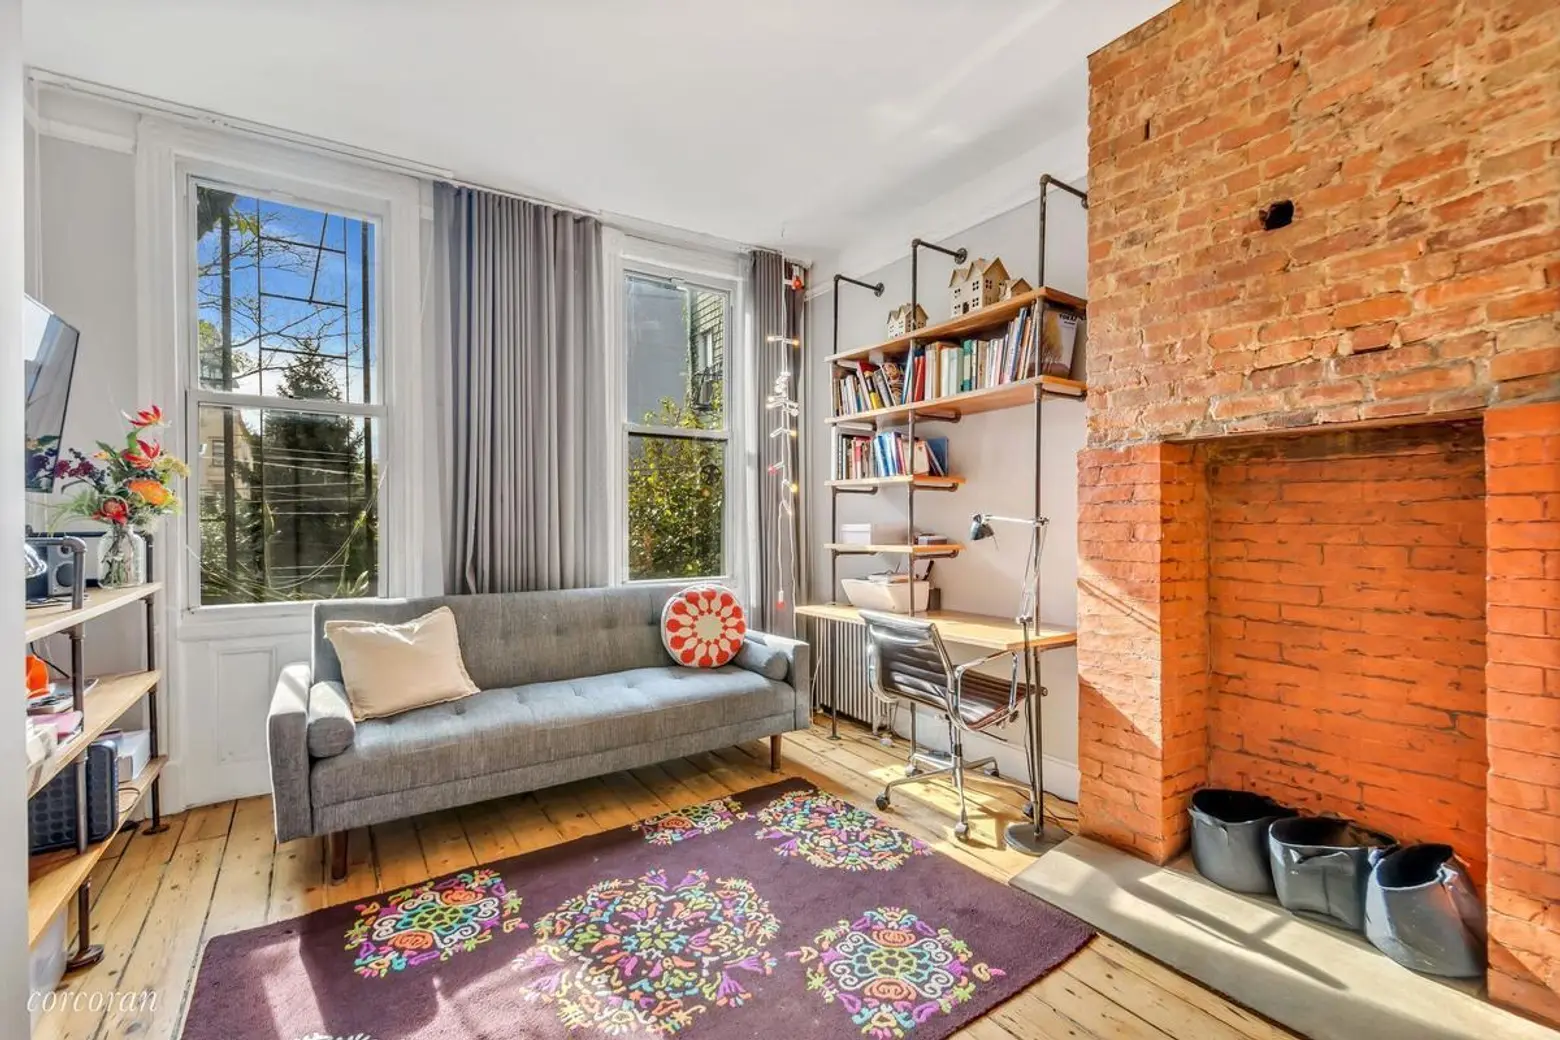 Cute Williamsburg condo asks $775K after a clever renovation